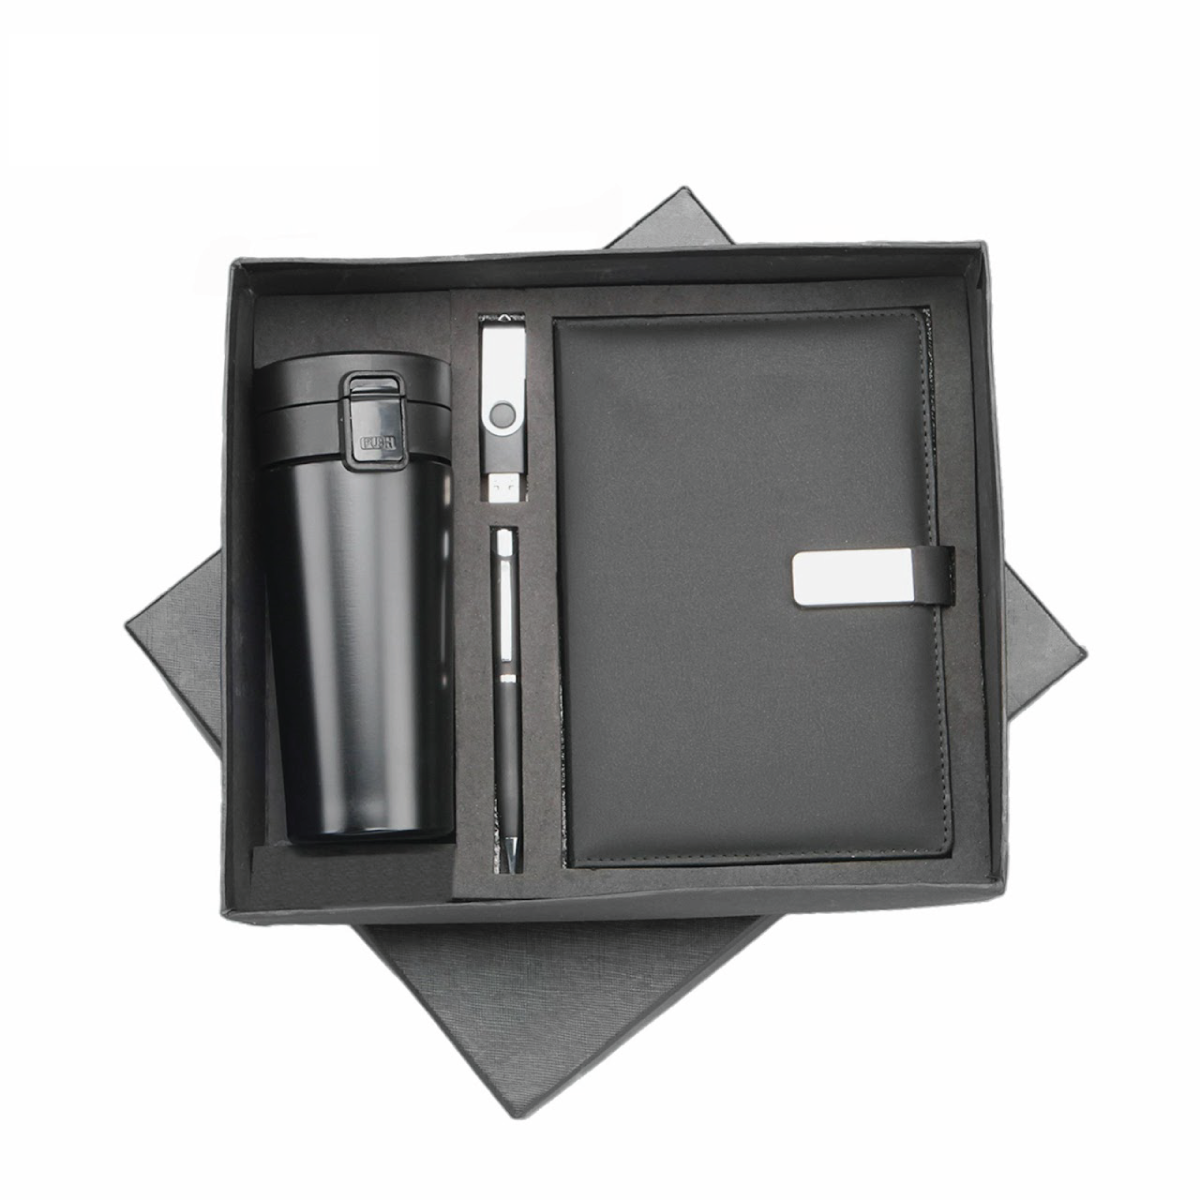 Black 4in1 Combo Gift Set 32 GB Pen Drive, Notebook Diary, Tumbler, & Pen - For Employee Joining Kit, Corporate, Client or Dealer Gifting JKSR199